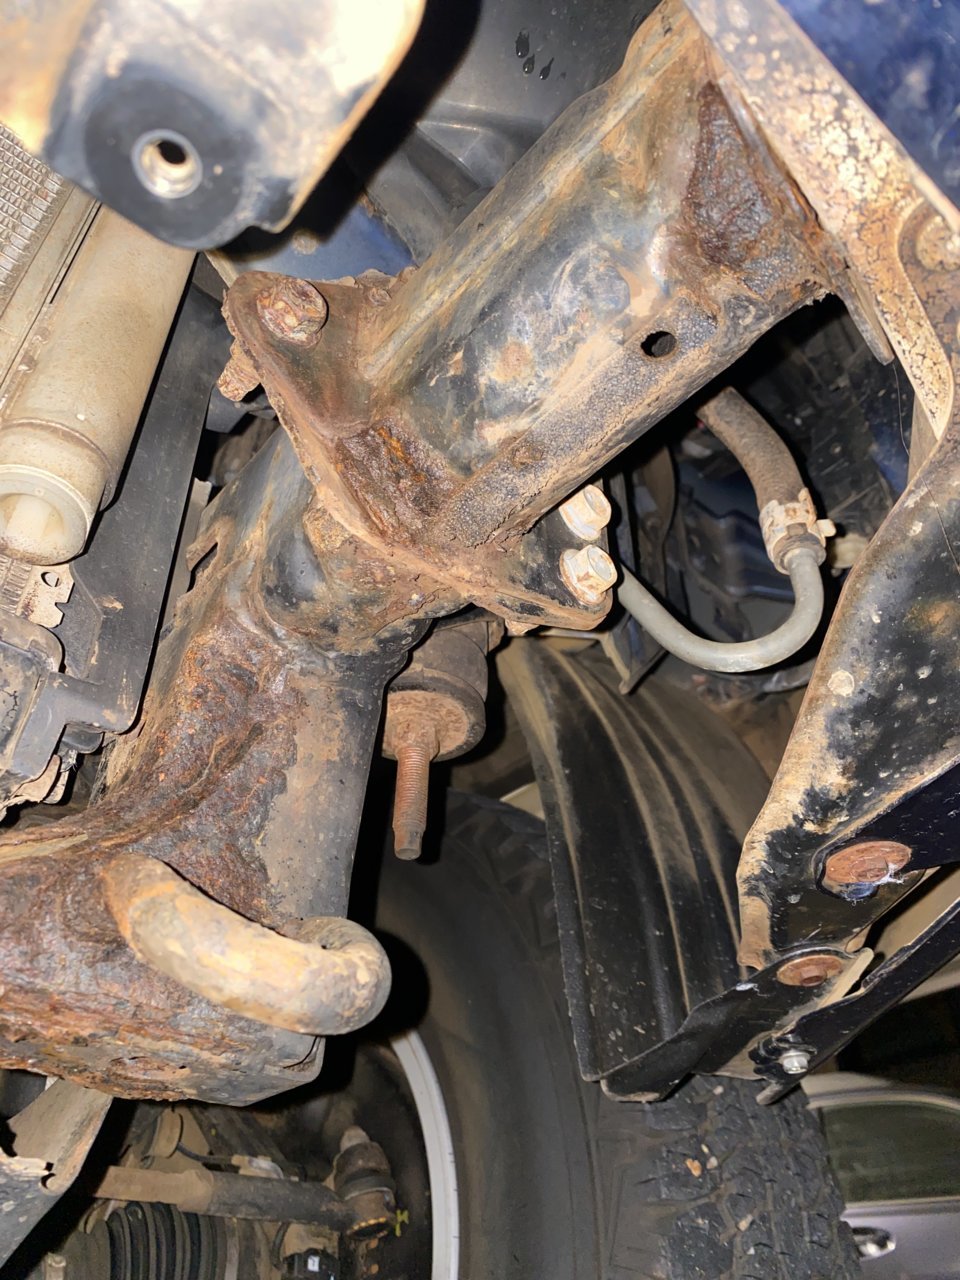 2014 4Runner: Rust by radiator/front tow hooks?